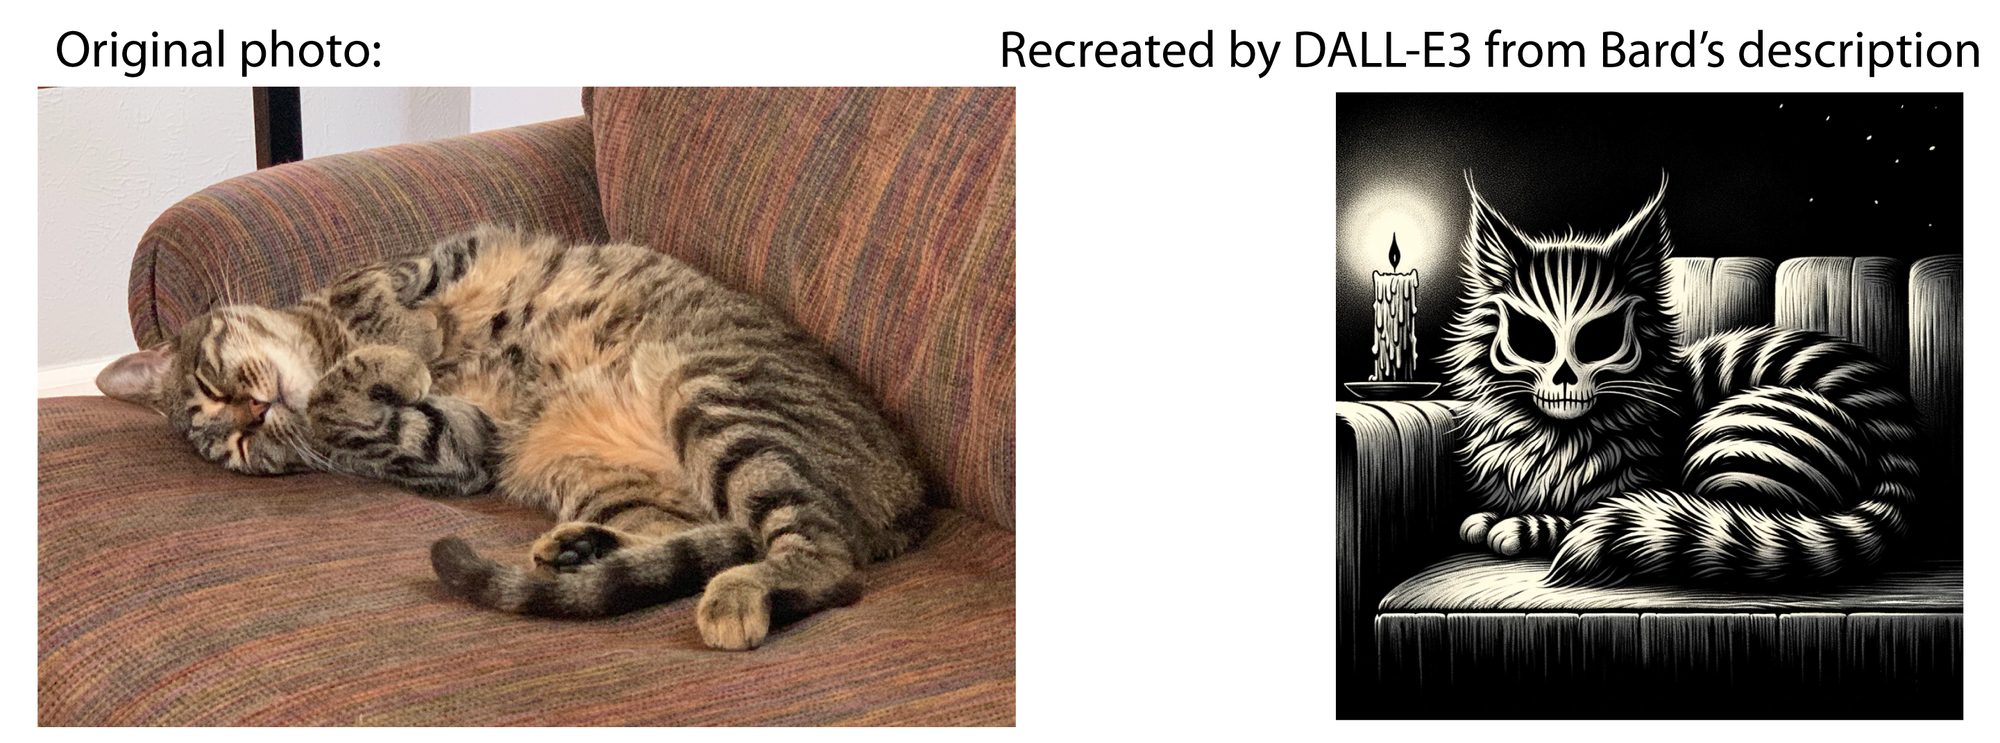 Left: A striped brown tabby cat sleeping on its back on a purplish couch, with its paws tucked up in front of its chest. There are no other parts of the room visible. Right: Recreated by DALL-E3 from Bard's description. It's a black and white drawing of a striped cat with a skull-patterned face, lit by the flame of a single candle.